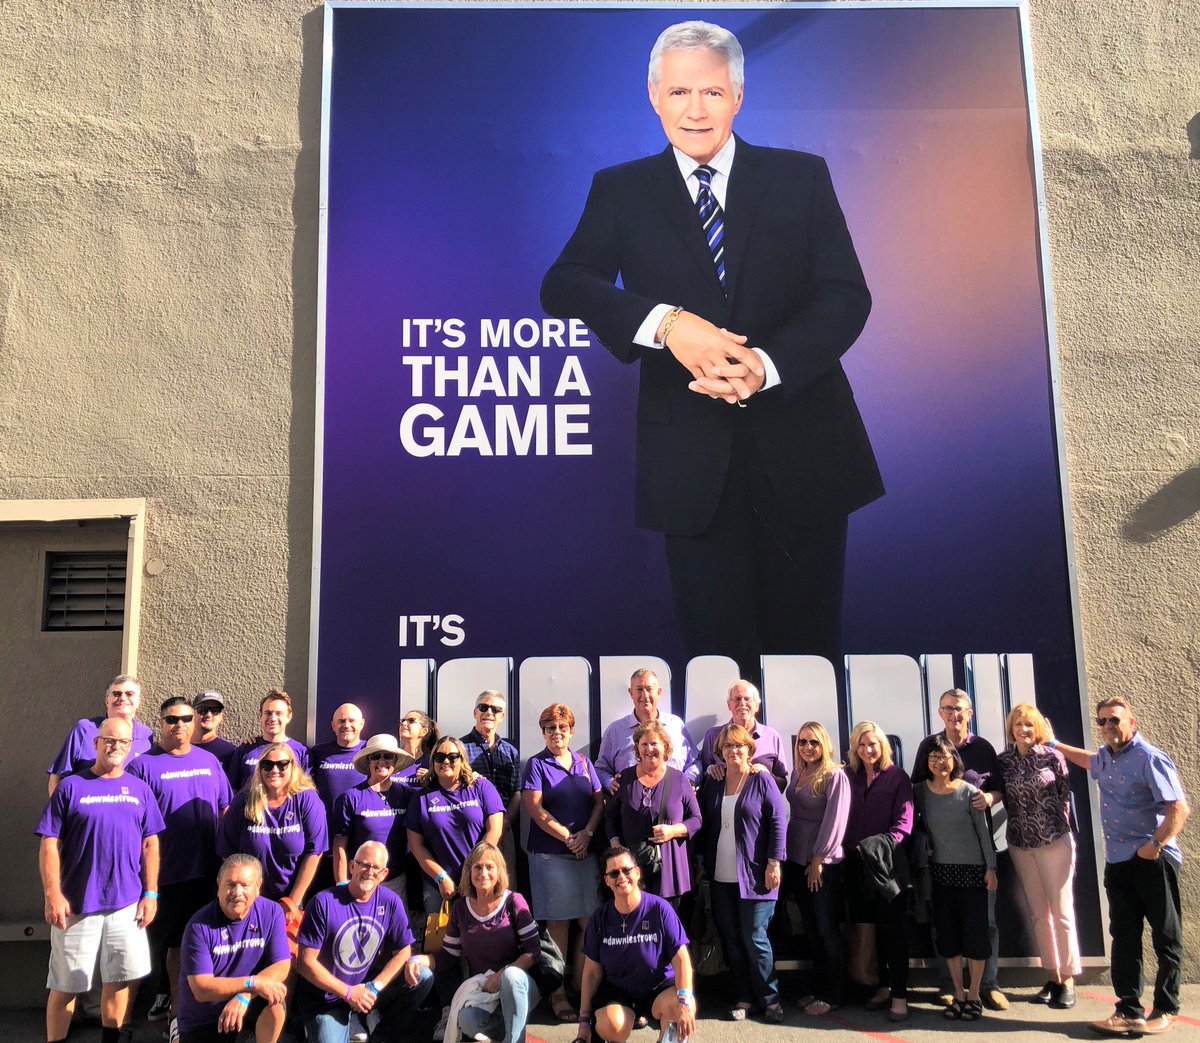 Thank you to @Jeopardy for having us at the show's taping yesterday! We were so excited to have several of our @PanCAN Circle of Hope monthly donors, Partners in Progress and Wage Hope My Way fundraisers in attendance with us for this exciting day.